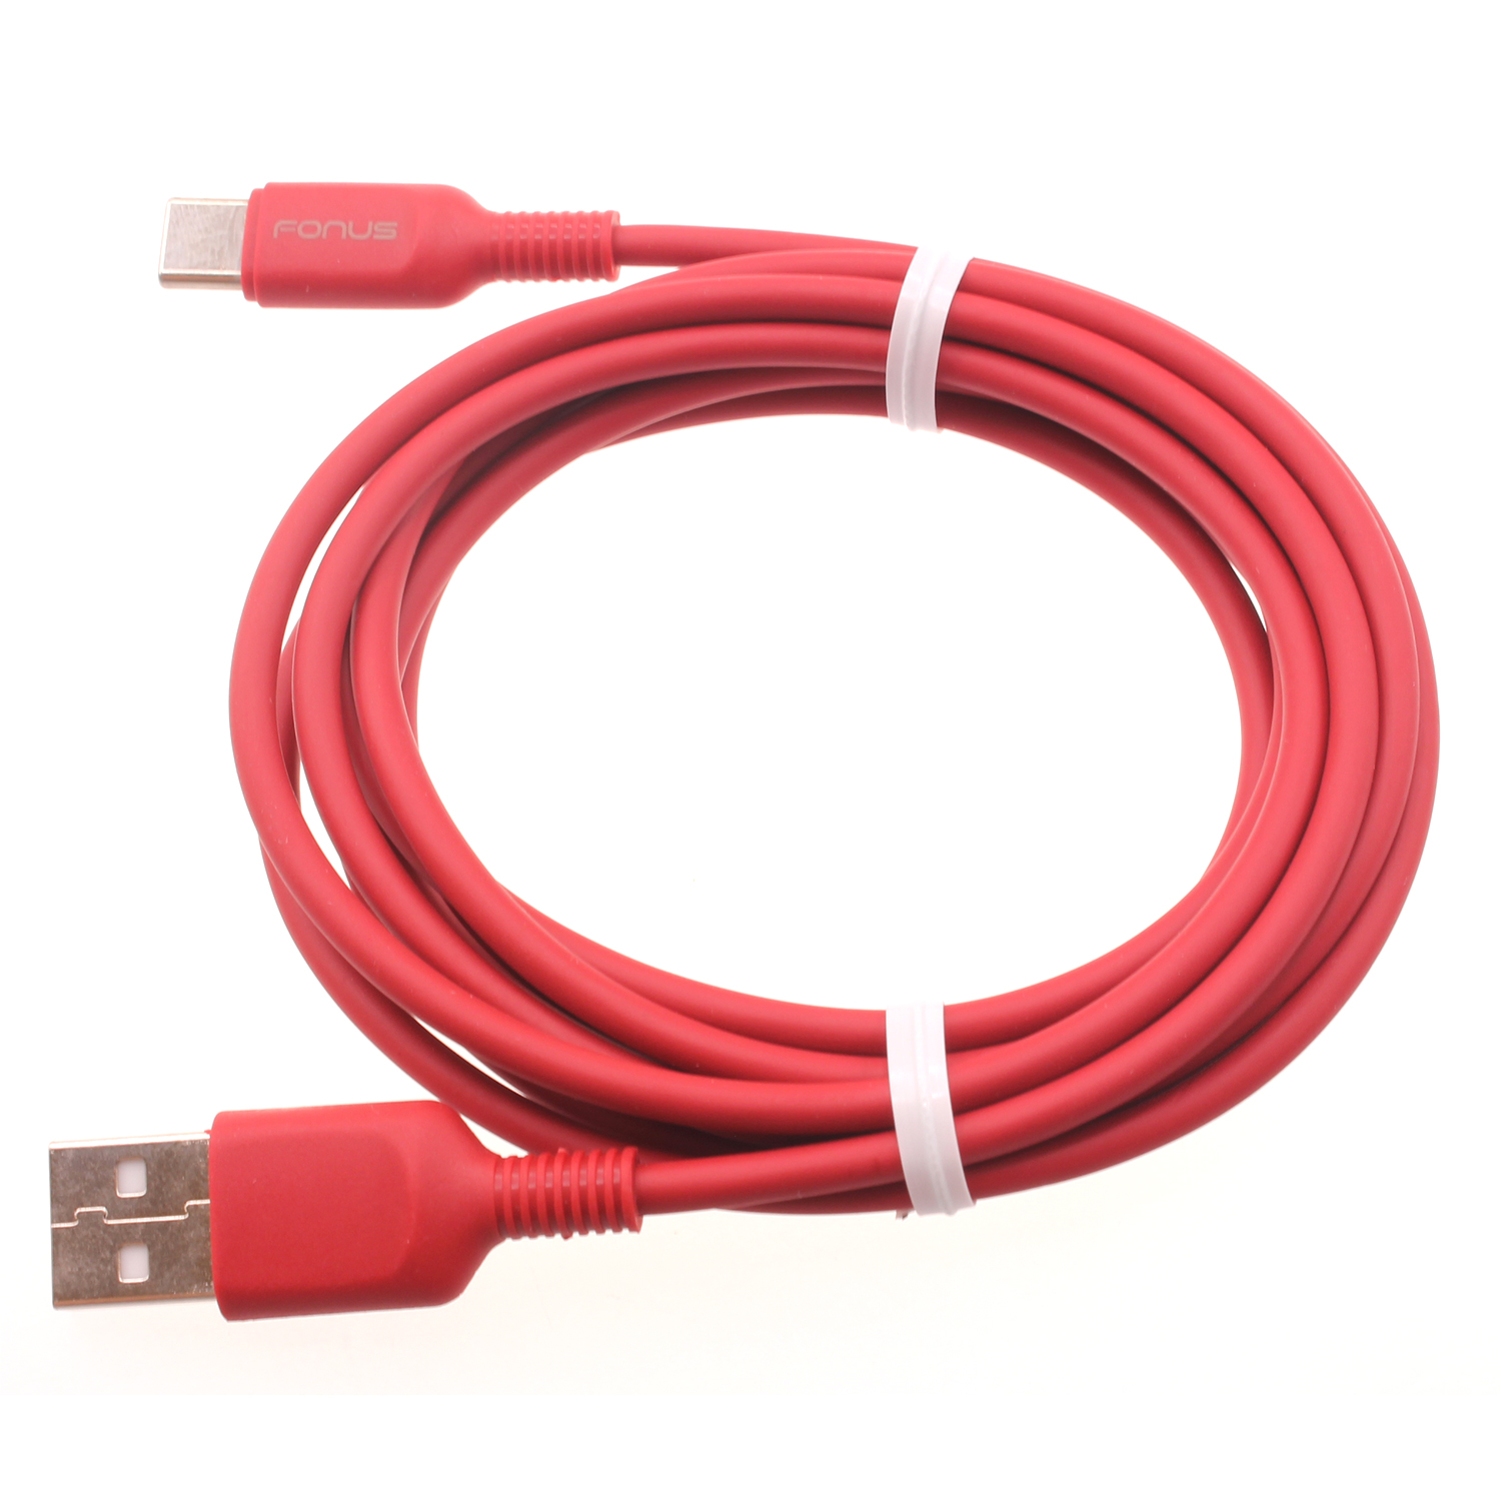 Red 6ft USB-C Cable for Moto G Power (2021)/Play (2021) Phones - Charger Cord Power Wire Type-C Fast Charge Compatible With Motorola Moto G Power (2021)/Play (2021) - image 1 of 5